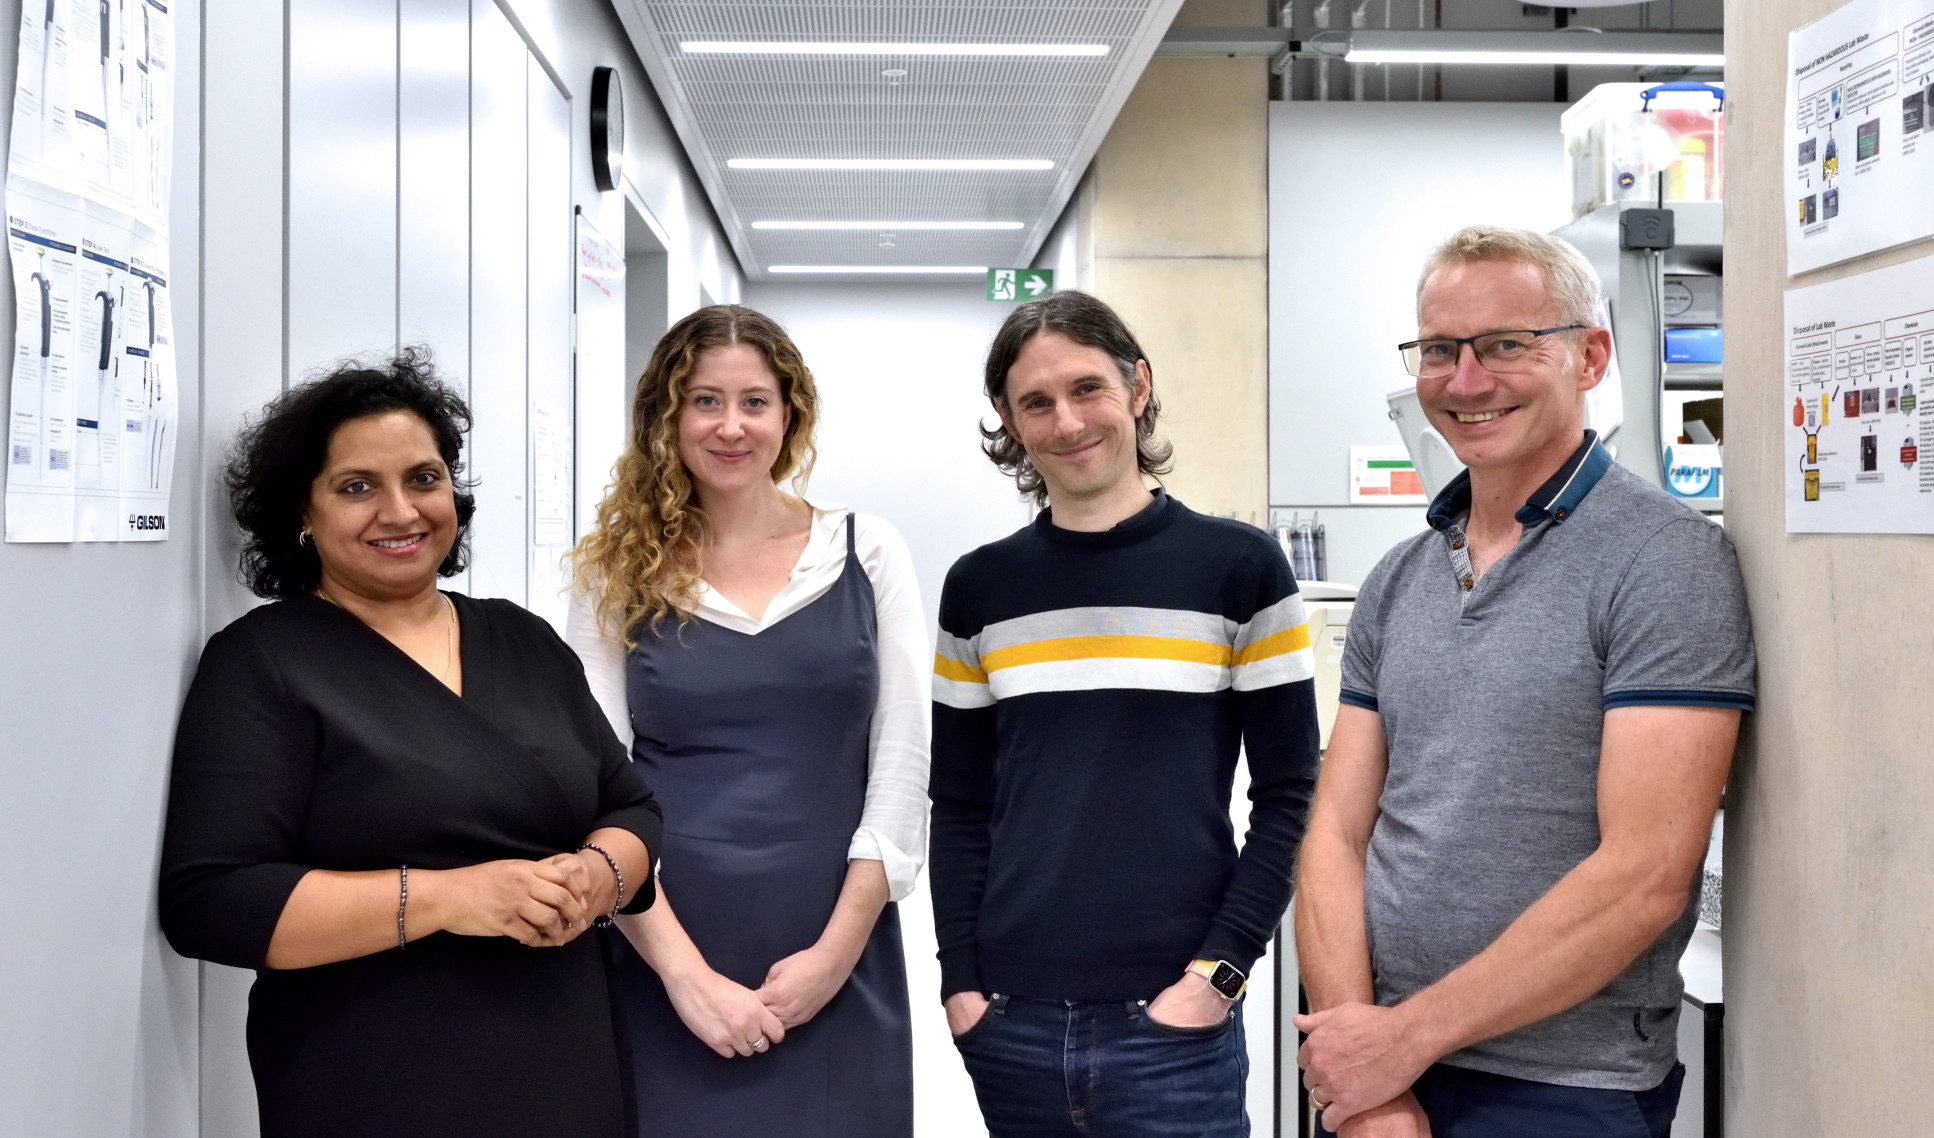 Hima Chouhan, Kayla Schulte, Andrew Grieve, Dr Ben Barratt, from the Breathe London team at Imperial.